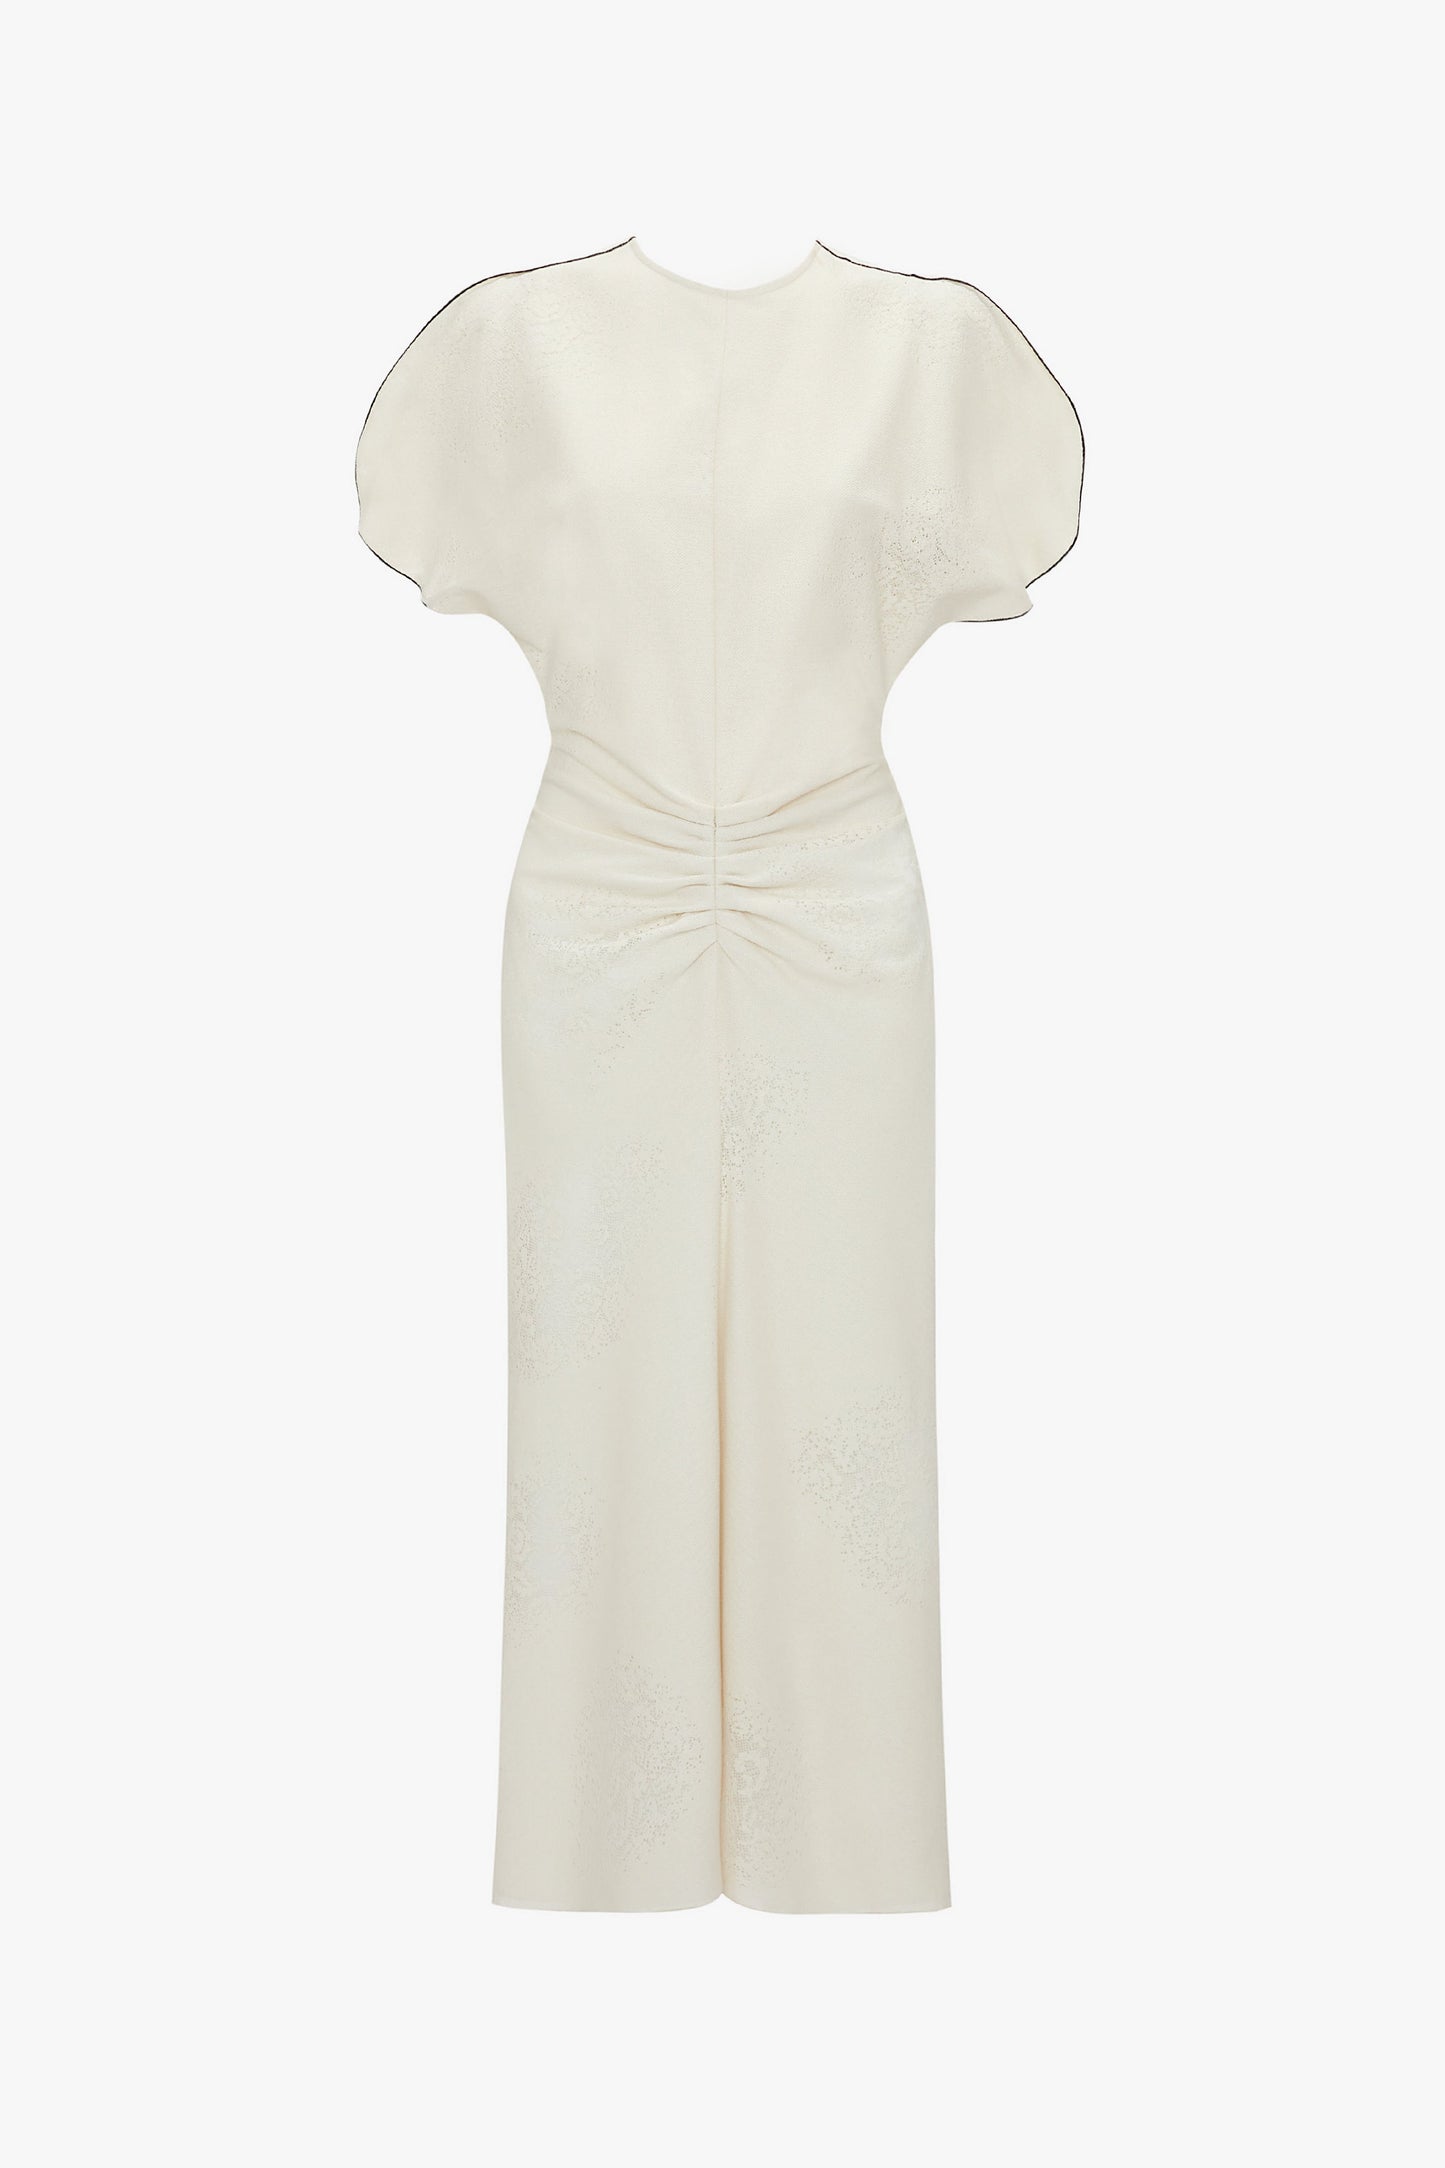 An elegant white dress featuring short puffed sleeves, a Gathered Waist Midi Dress In Cream and a subtle floral pattern by Victoria Beckham.